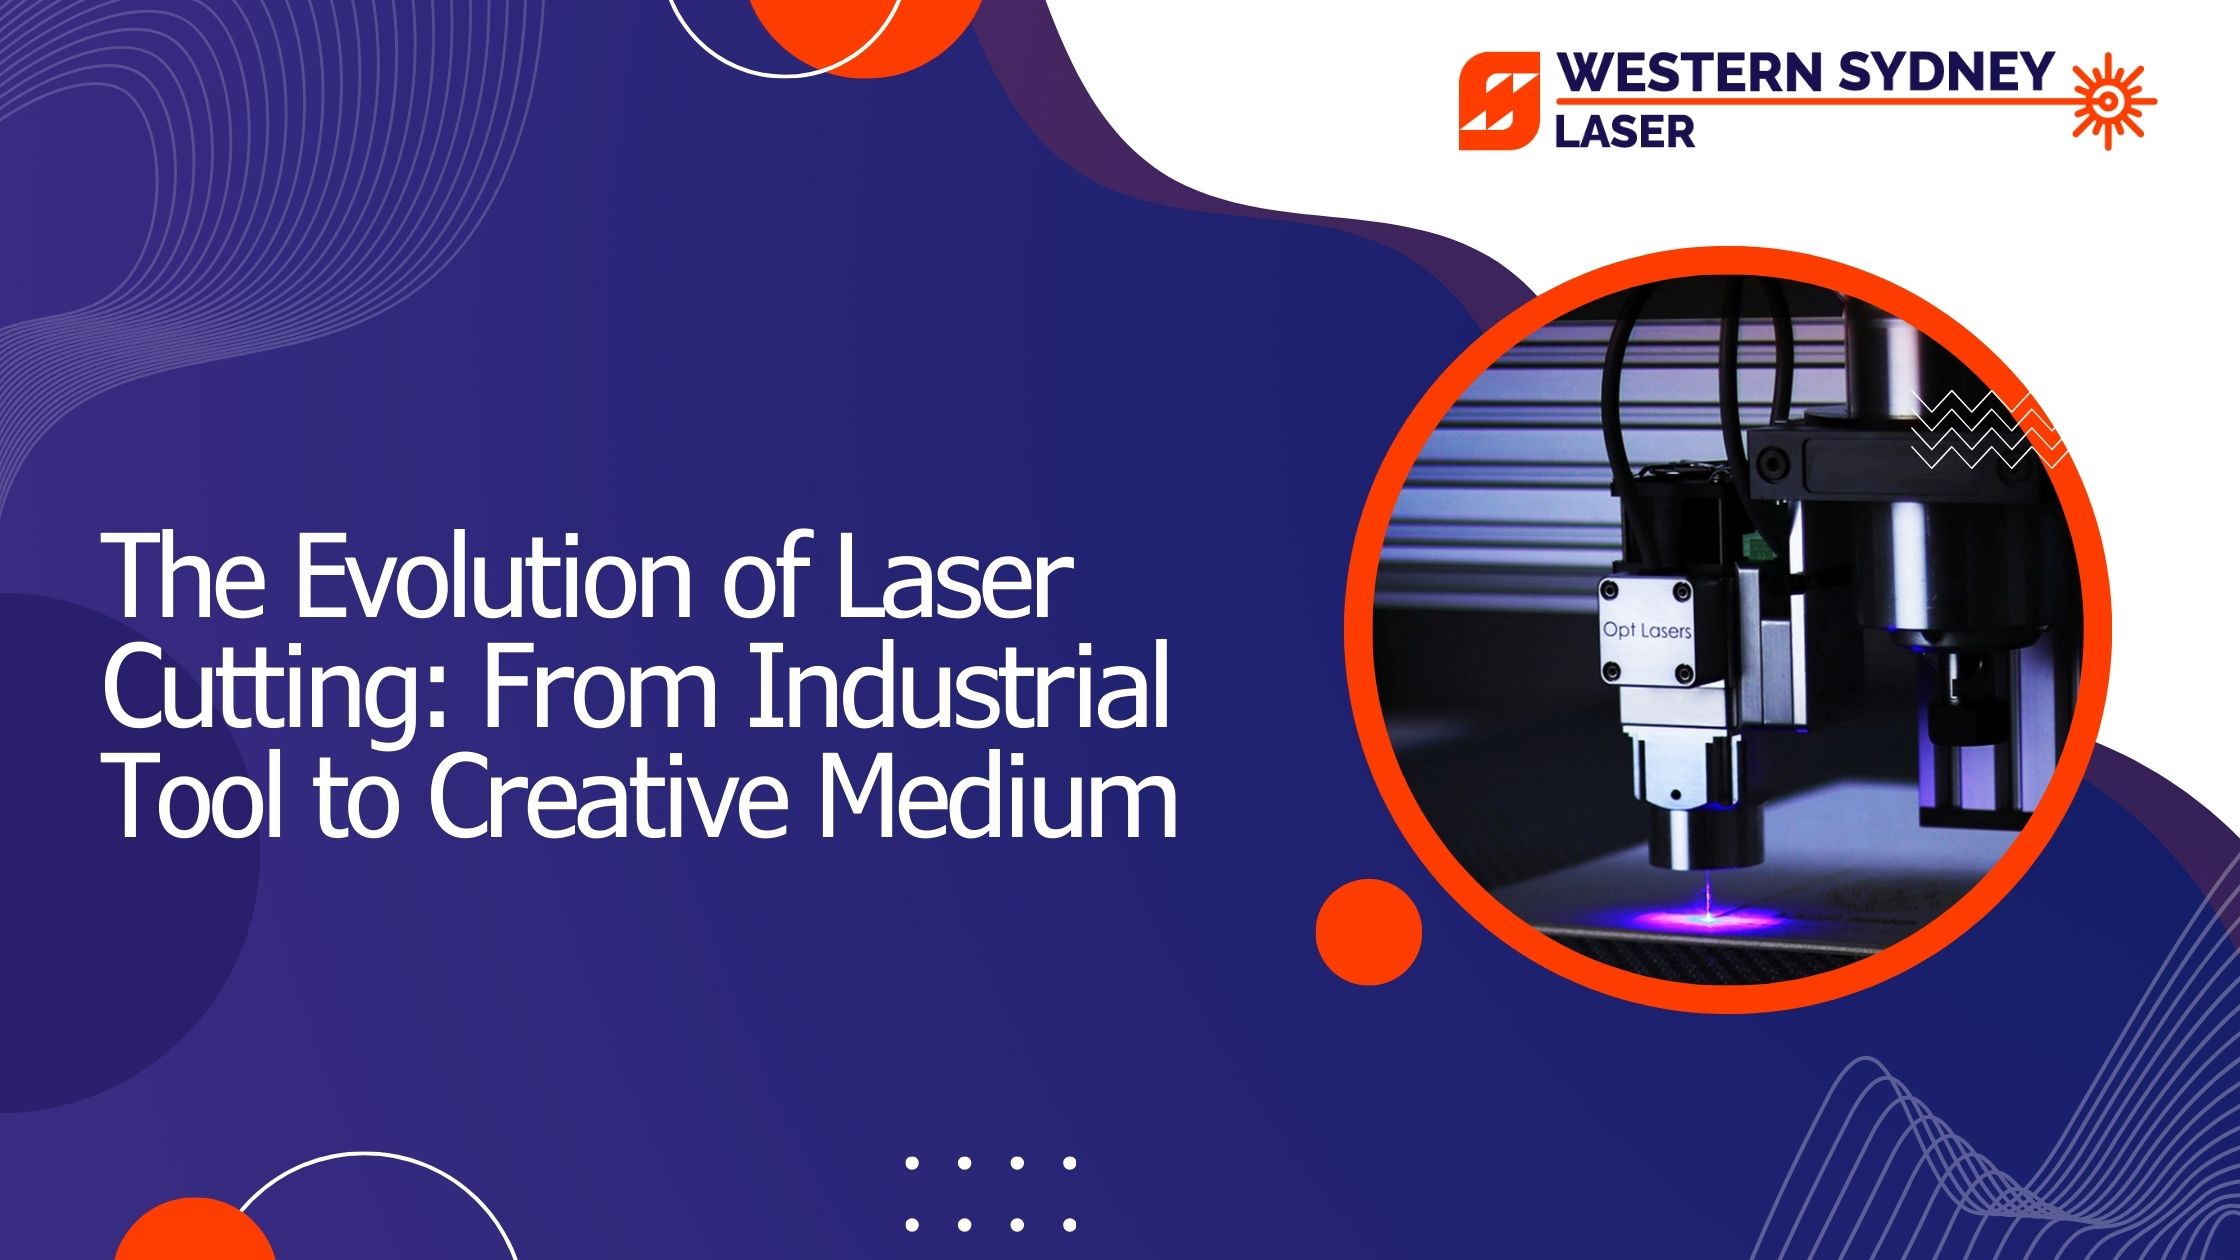 The Evolution of Laser Cutting: From Industrial Tool to Creative Medium